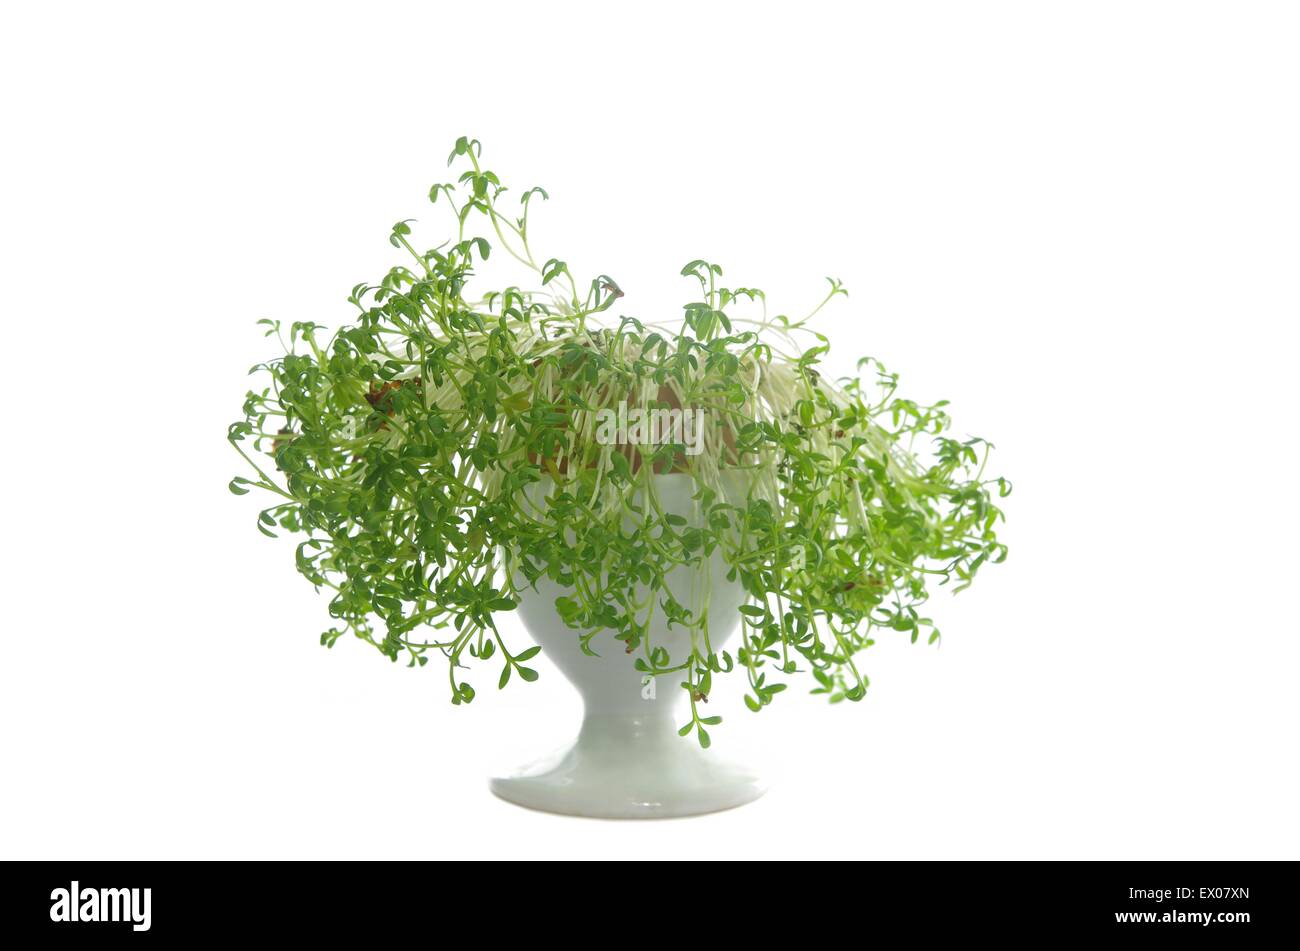 growing cress in eggshell on white background Stock Photo